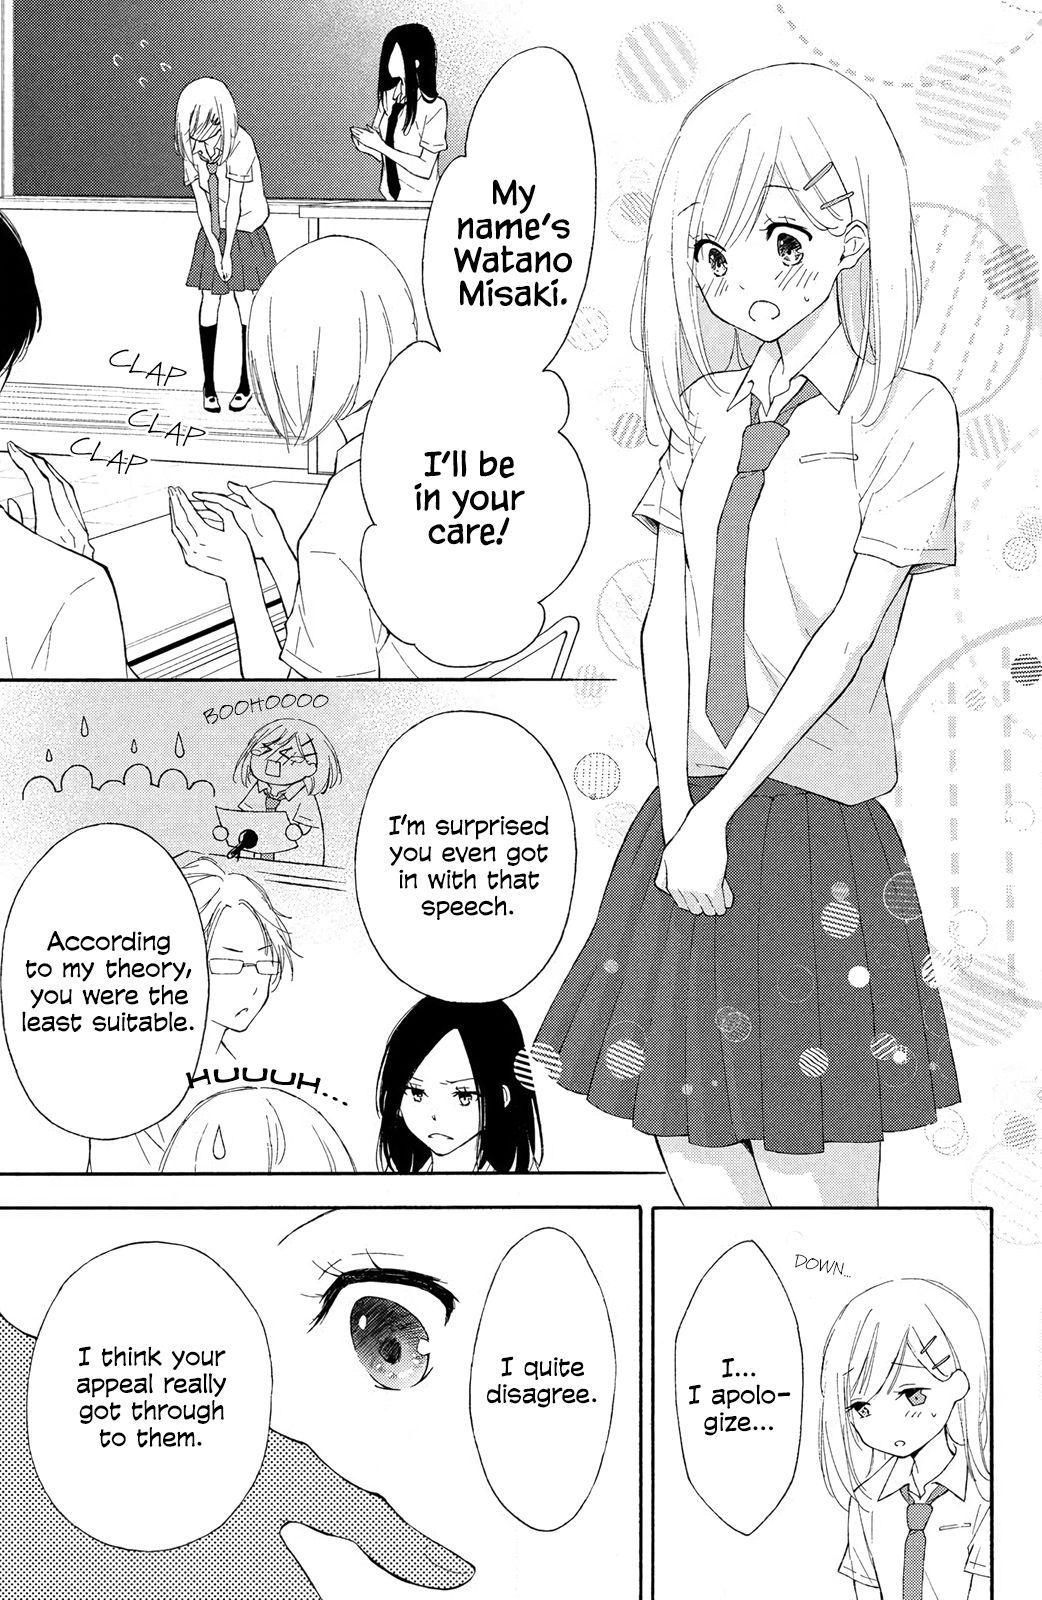 I Wish Her Love Could Come True - Page 3